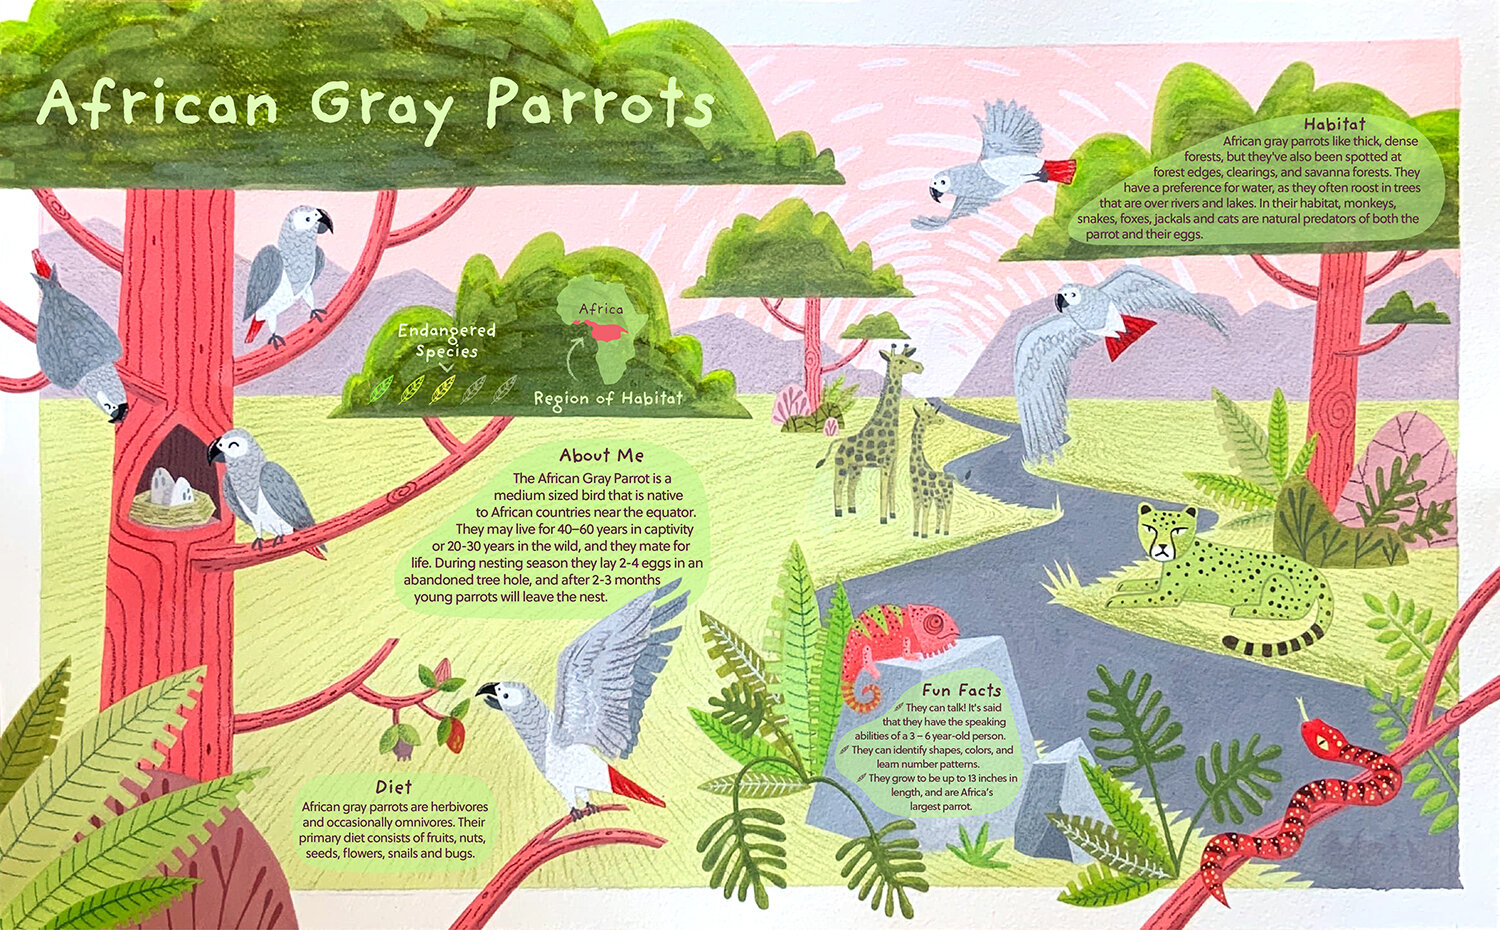 Illustrated Informational Two-Page Spread on African Gray Parrots